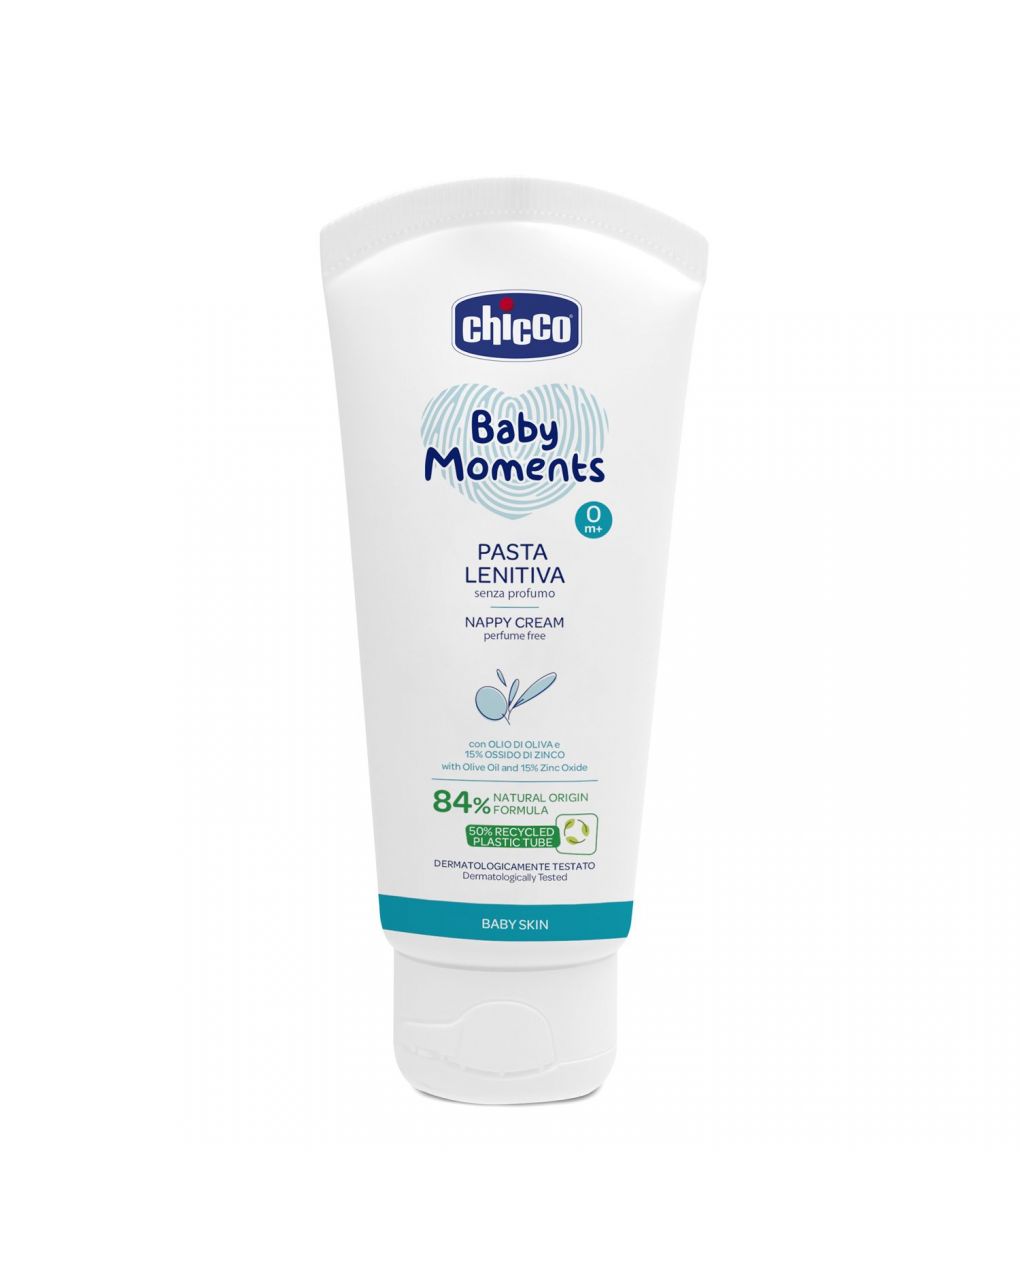 Baby moments pasta lenitiva chicco baby skin - Chicco